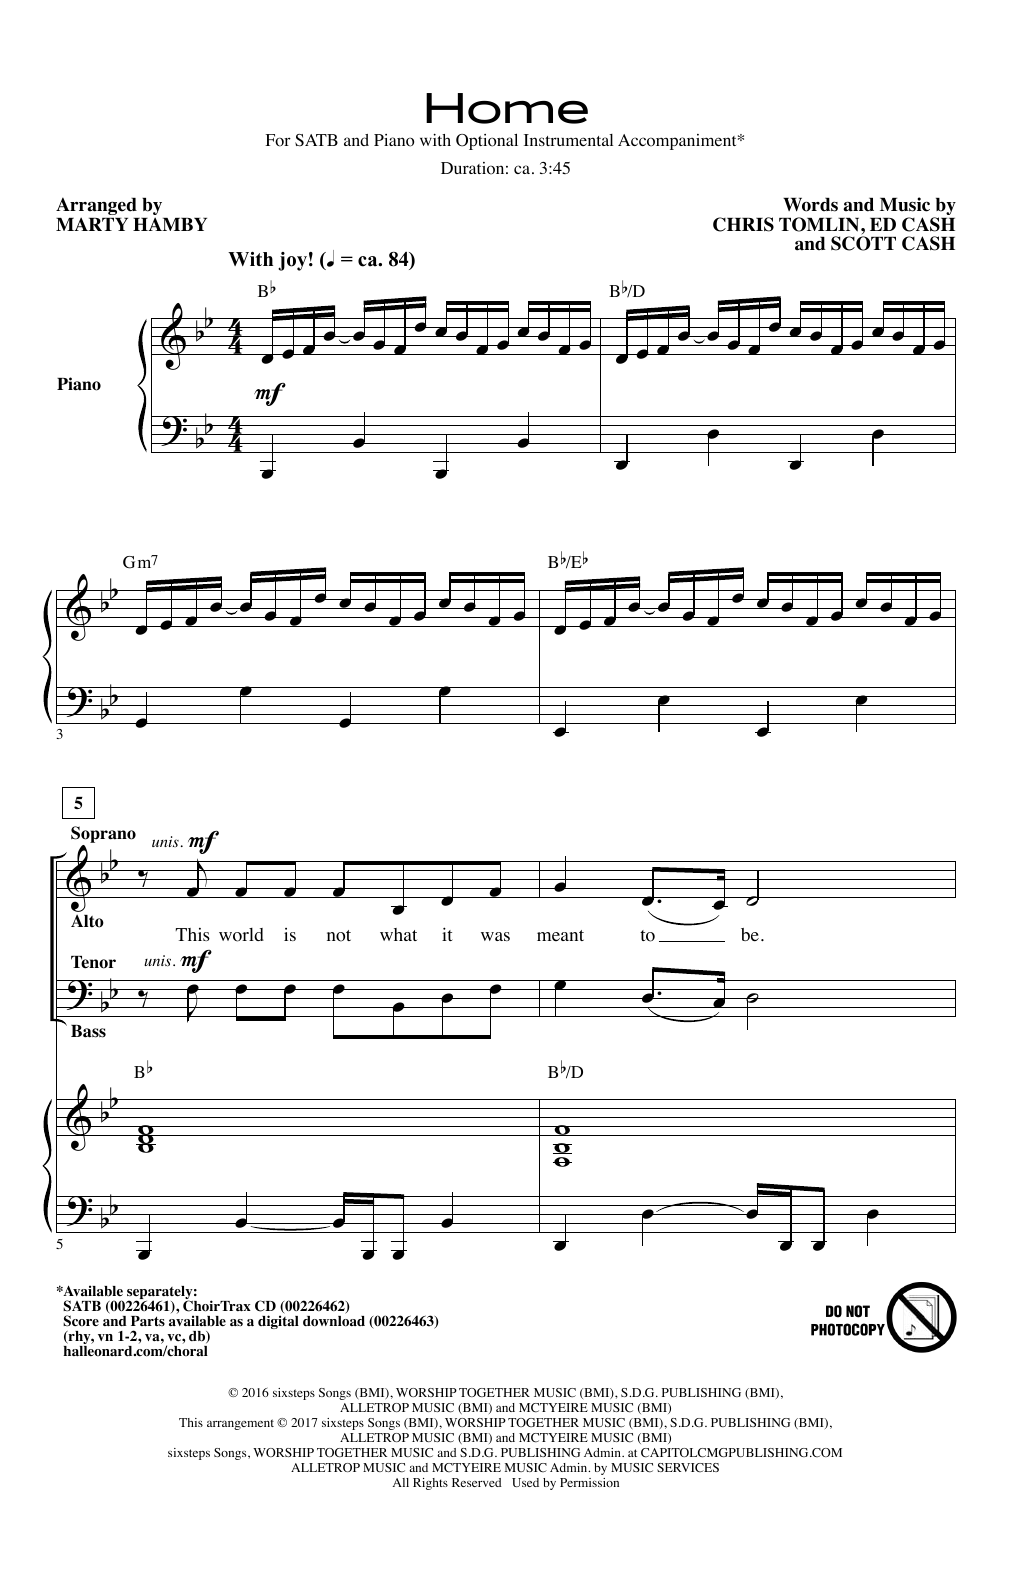 Download Chris Tomlin Home (arr. Marty Hamby) Sheet Music